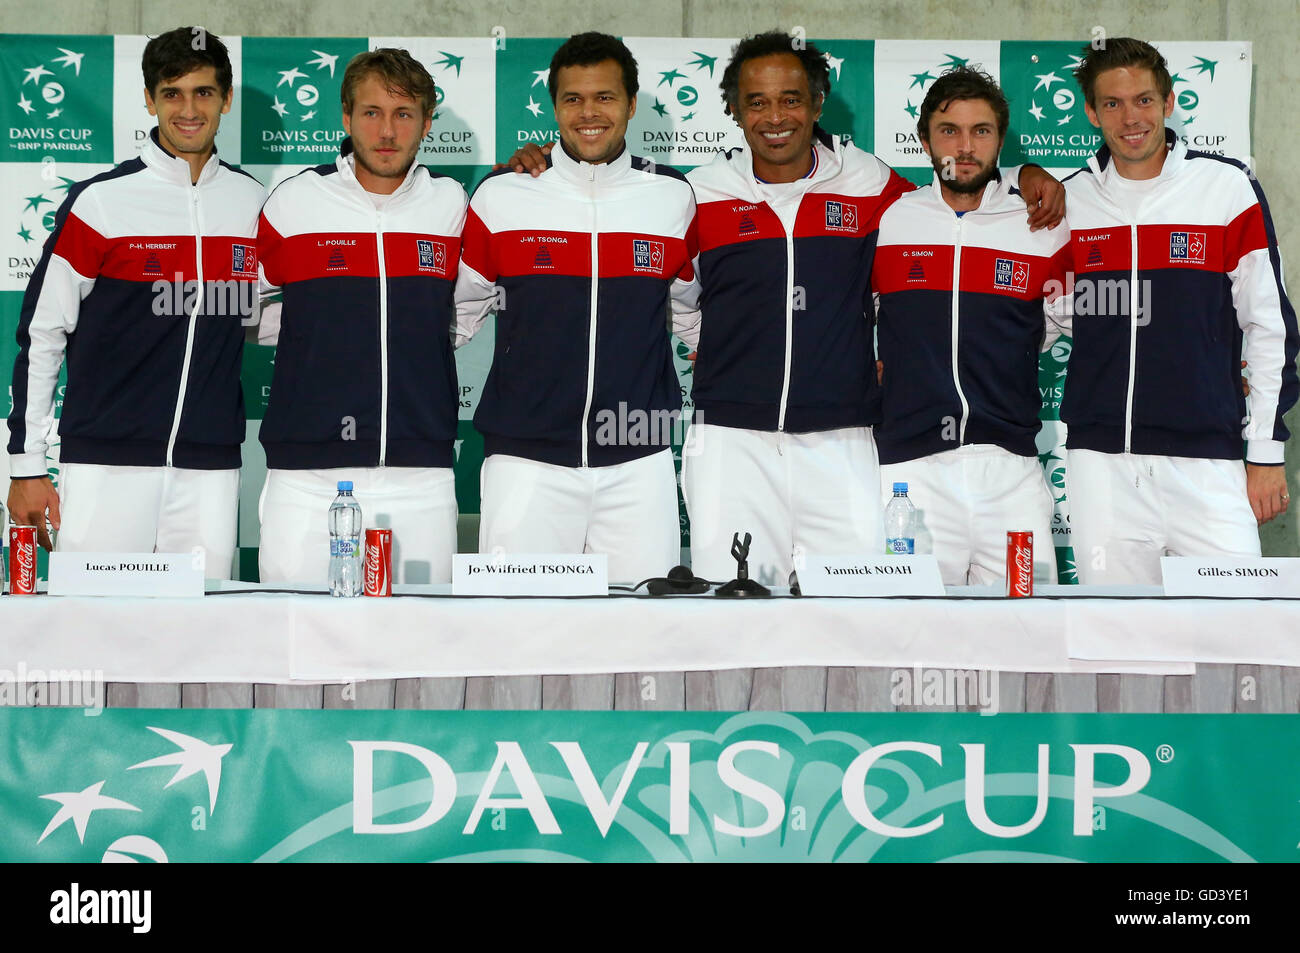 Trinec, Czech Republic. 12th July, 2016. Tennis players, from left, Piere-Hugues Herbert, Lucas Pouille, Jo-Wilfried Tsonga, non playing captain Yannick Noah, Gilles Simon and Nicolase Mahut, members of the French Davis Cup team, attend a news conference on Tuesday, July 12, 2016 in Trinec, Czech Republic, prior to the Davis Cup quarterfinal match Czech Republic vs France. © Petr Sznapka/CTK Photo/Alamy Live News Stock Photo